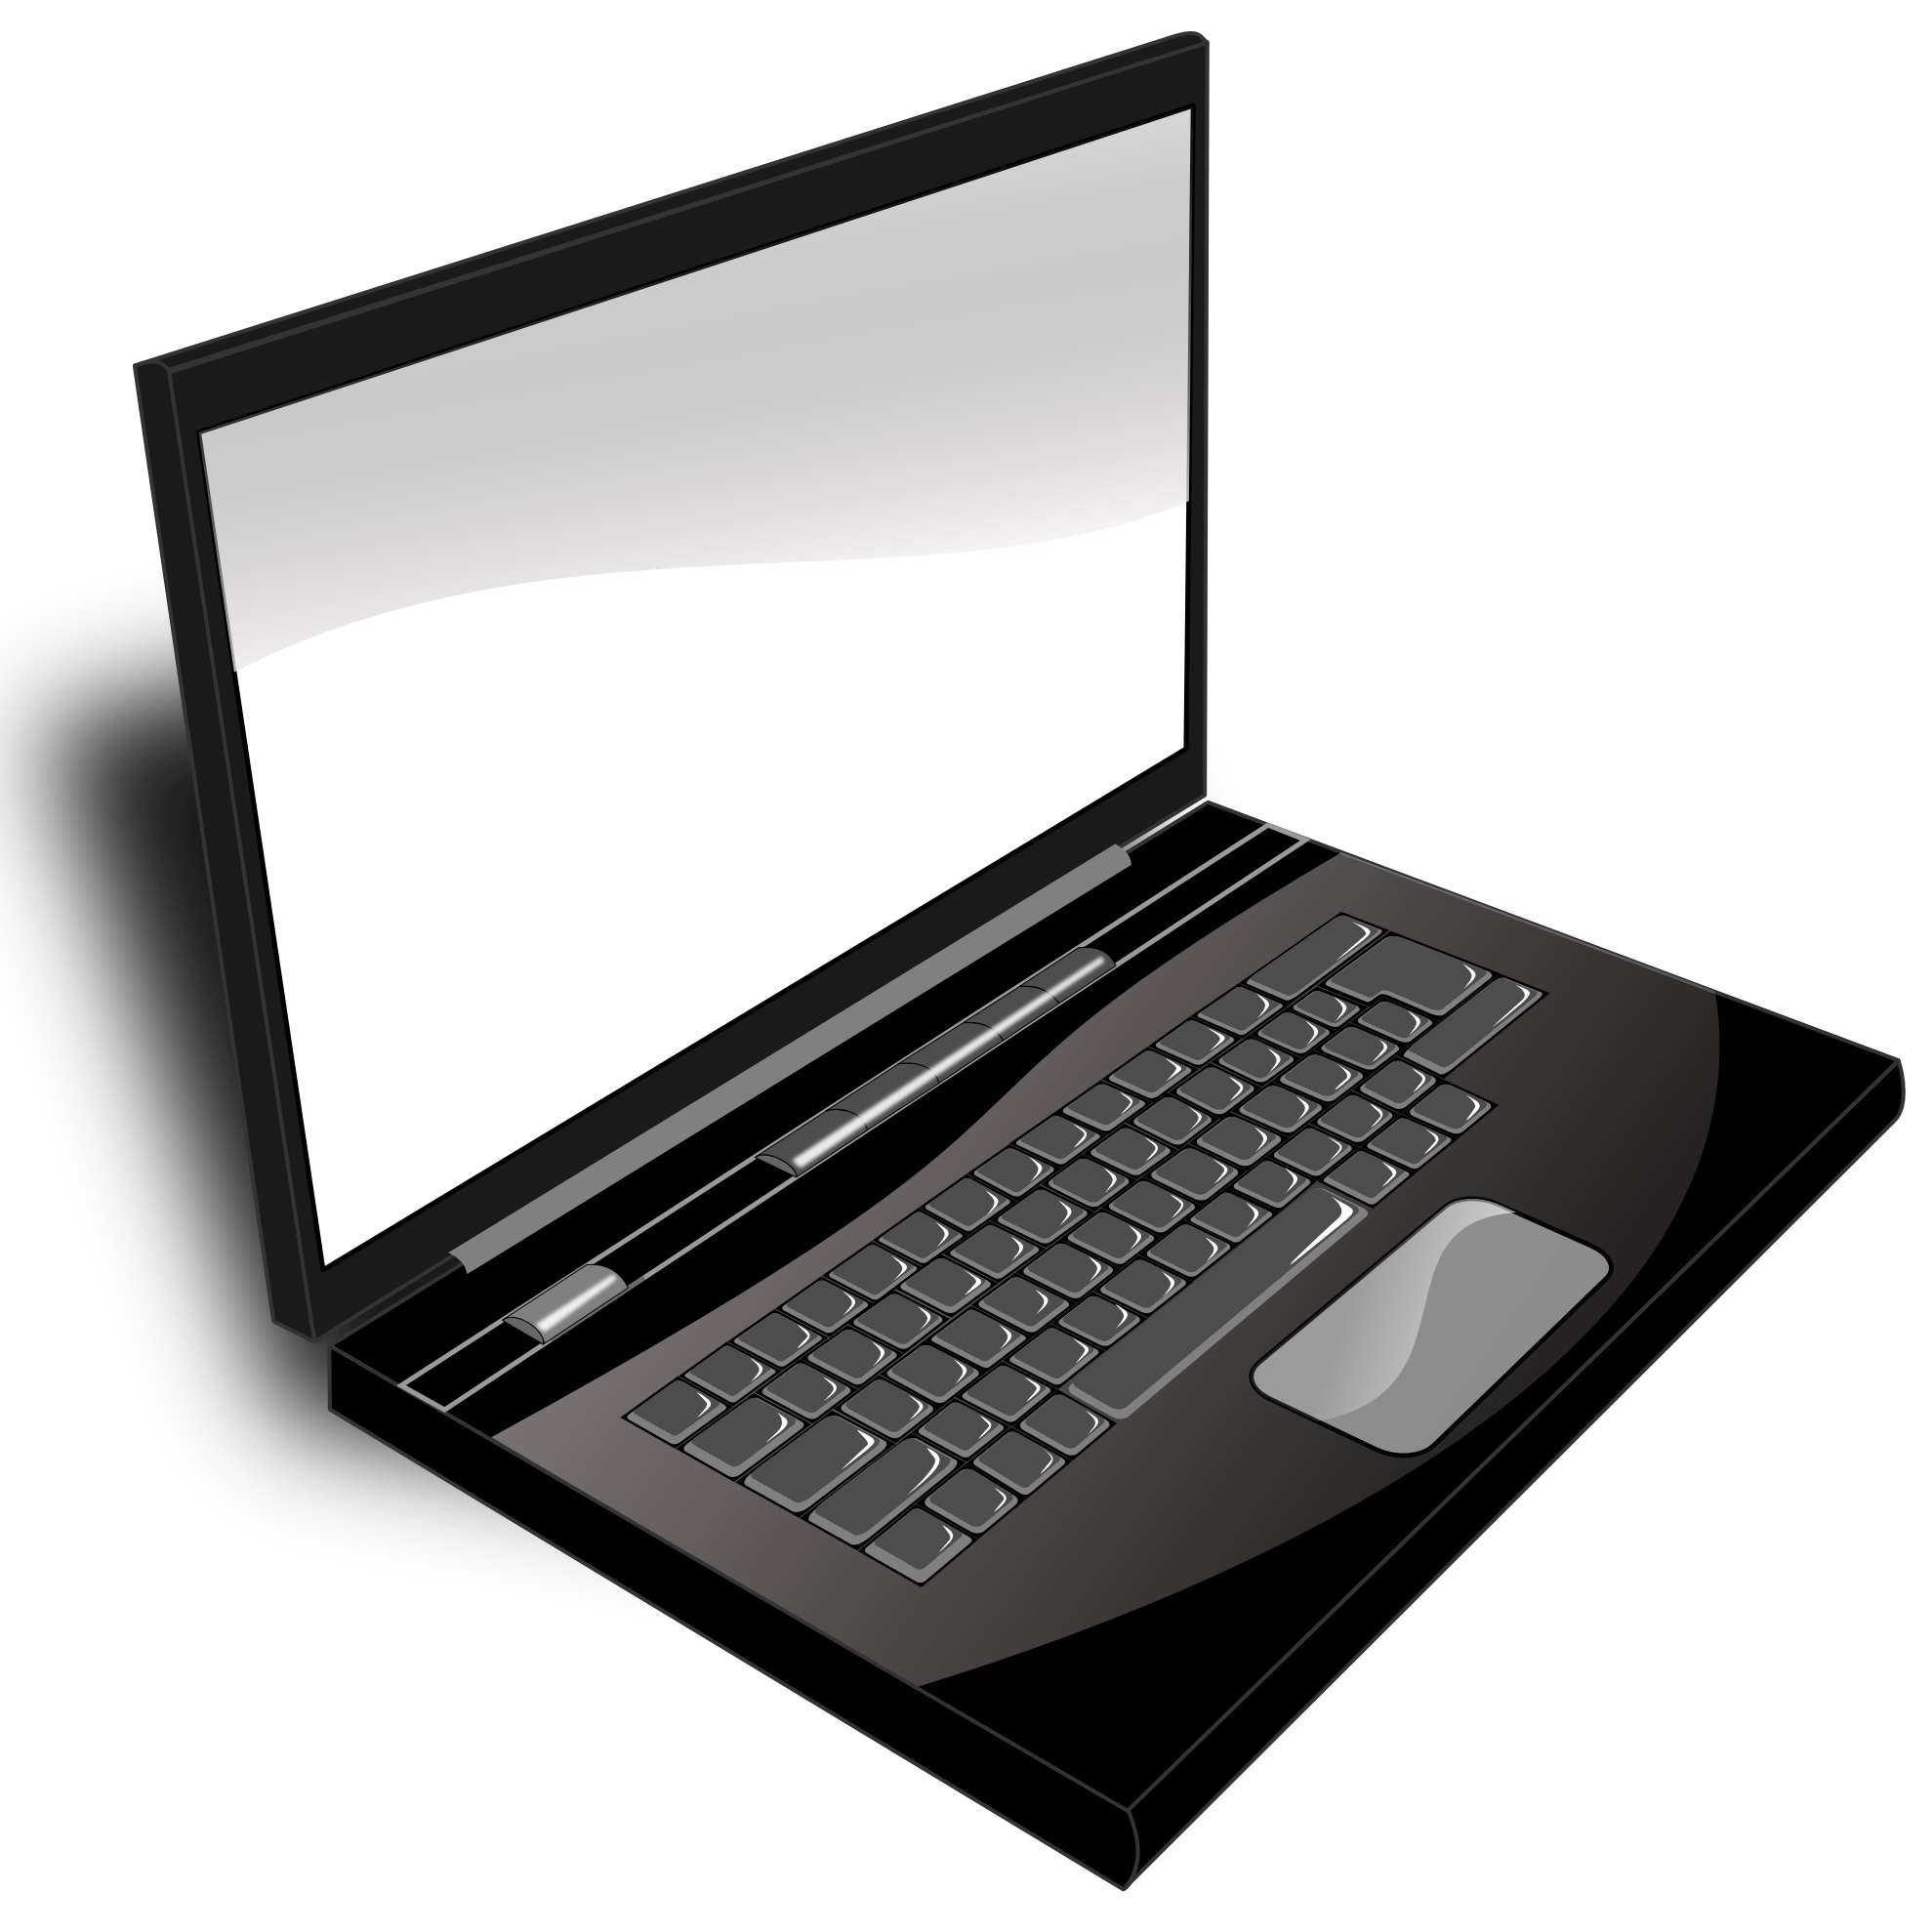 Laptop Pictures Images Image Png Clipart